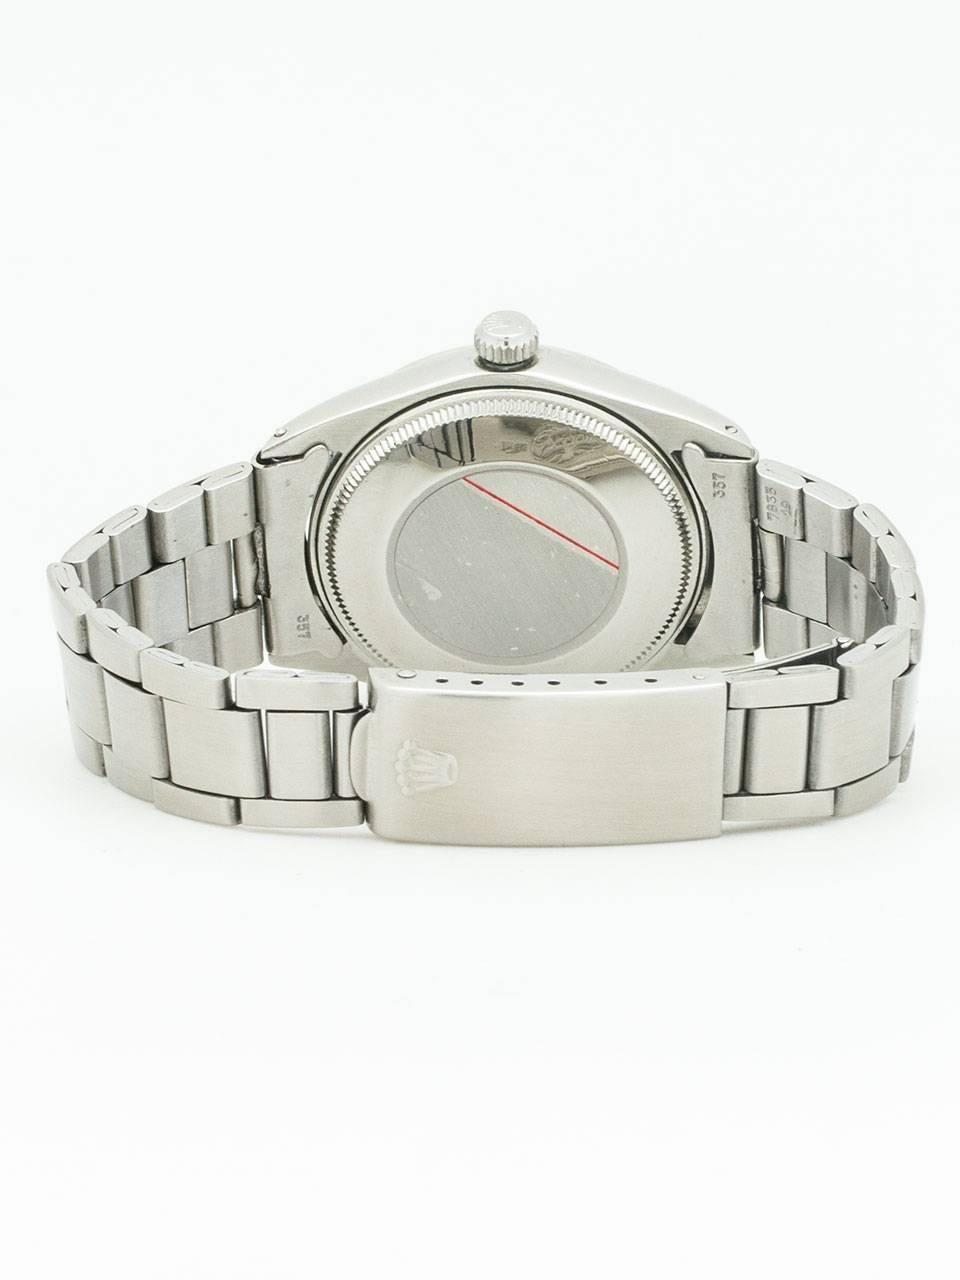 Women's or Men's Rolex Stainless Steel Oyster Perpetual Wristwatch Ref 1002 circa 1969